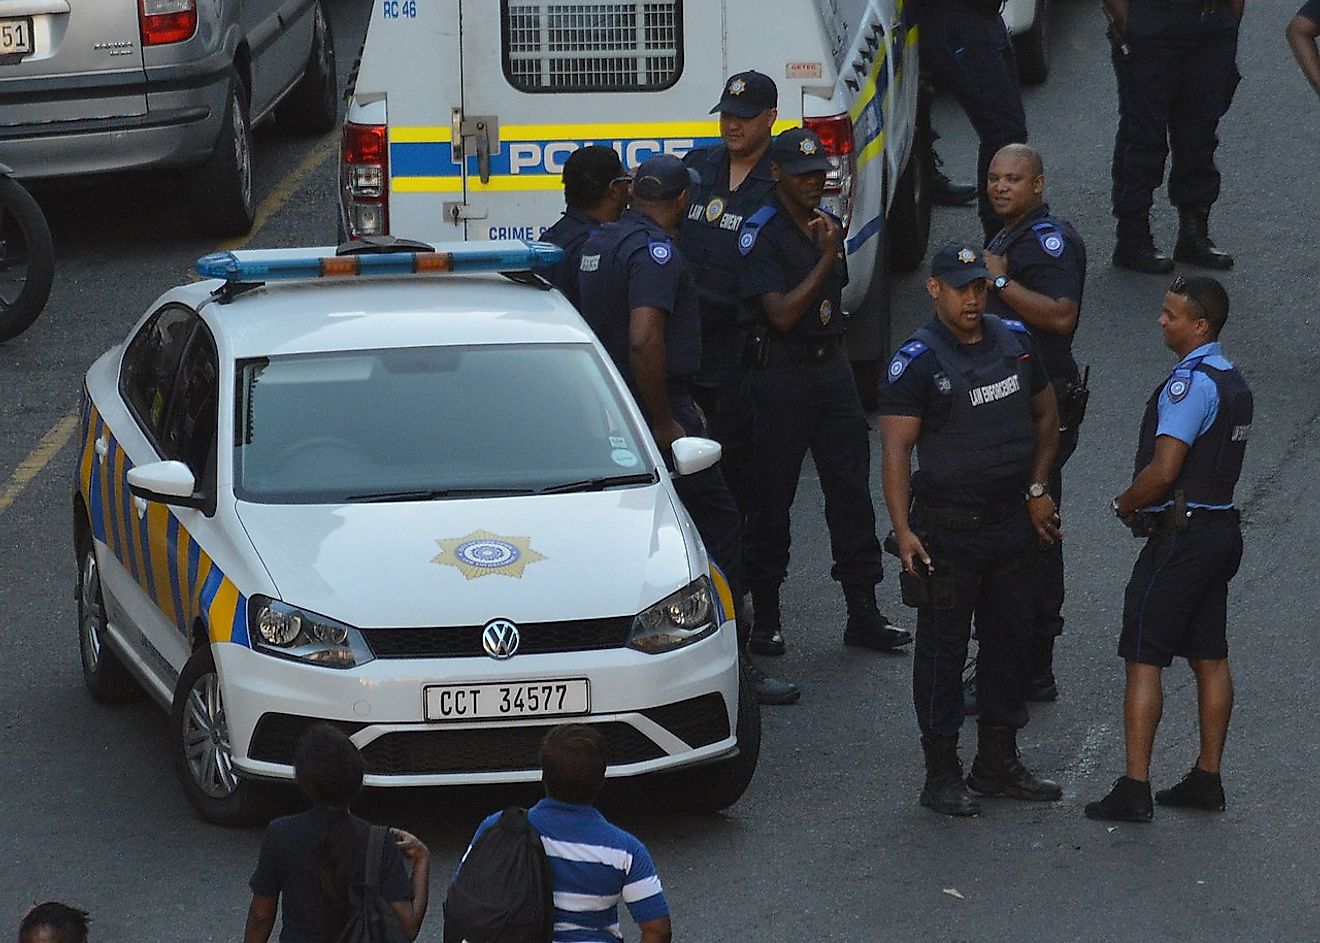 A group of Cape Town Metropolitan Police officers in various uniforms with a Metro Police vehicle. Image credit: Discott/Wikimedia.org